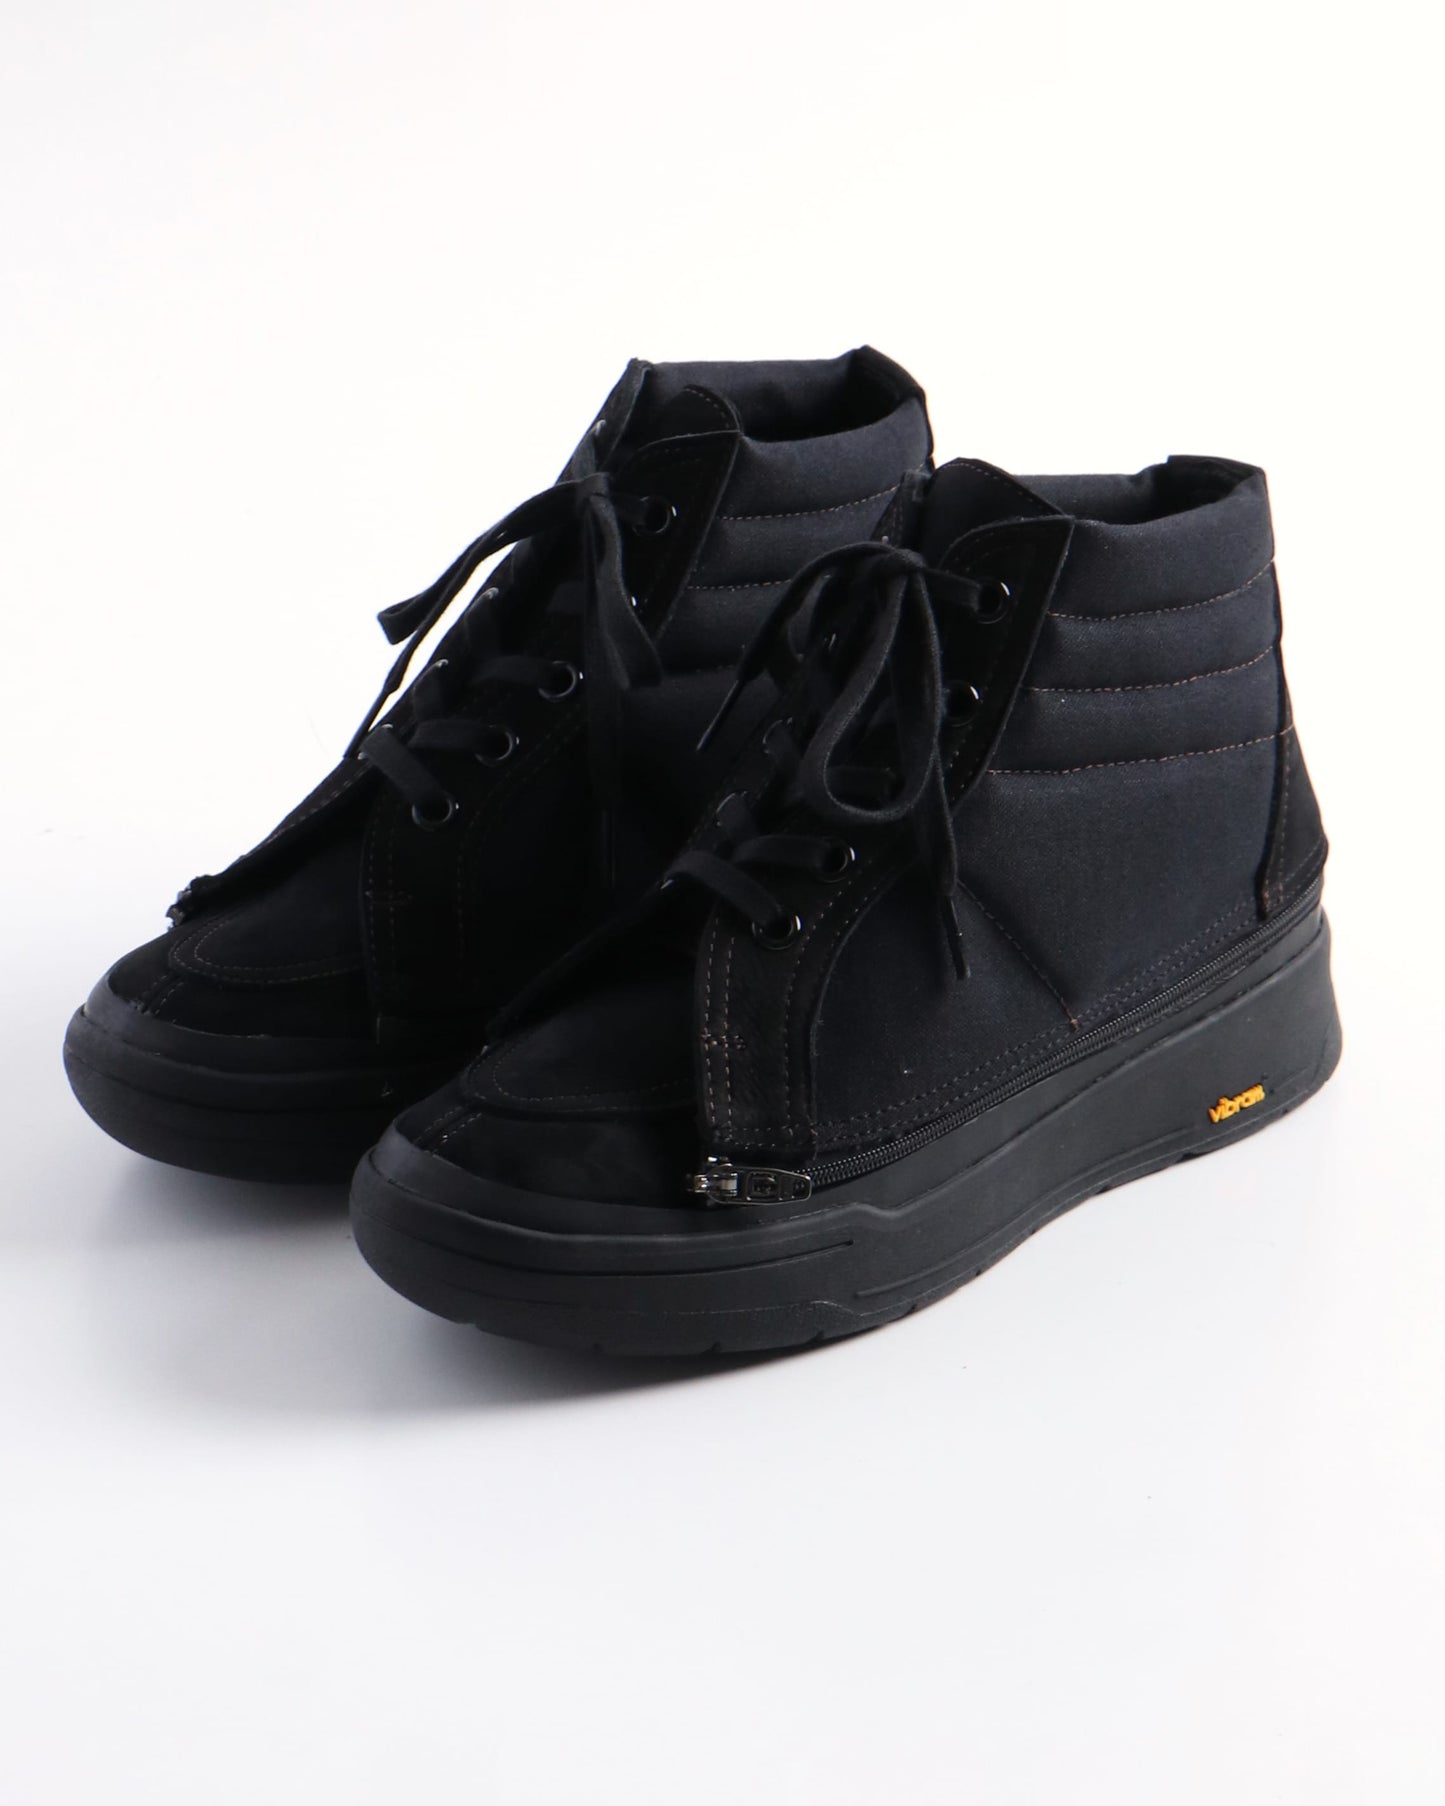 DOUBLE FACE SNEAKERS "Loafers" BLACK